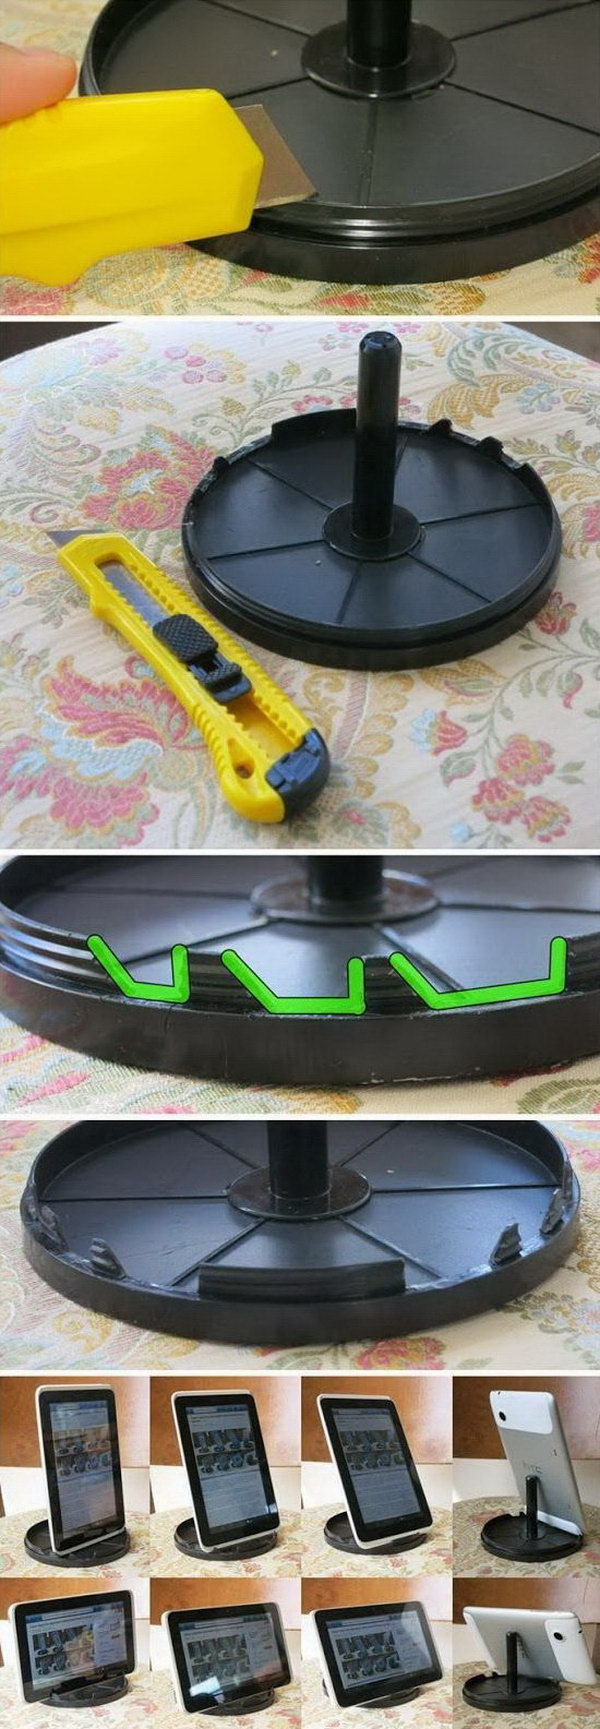 DIY CD spindle iPad stand. It’s super easy to create an iPad stand out of the CD spinder. 